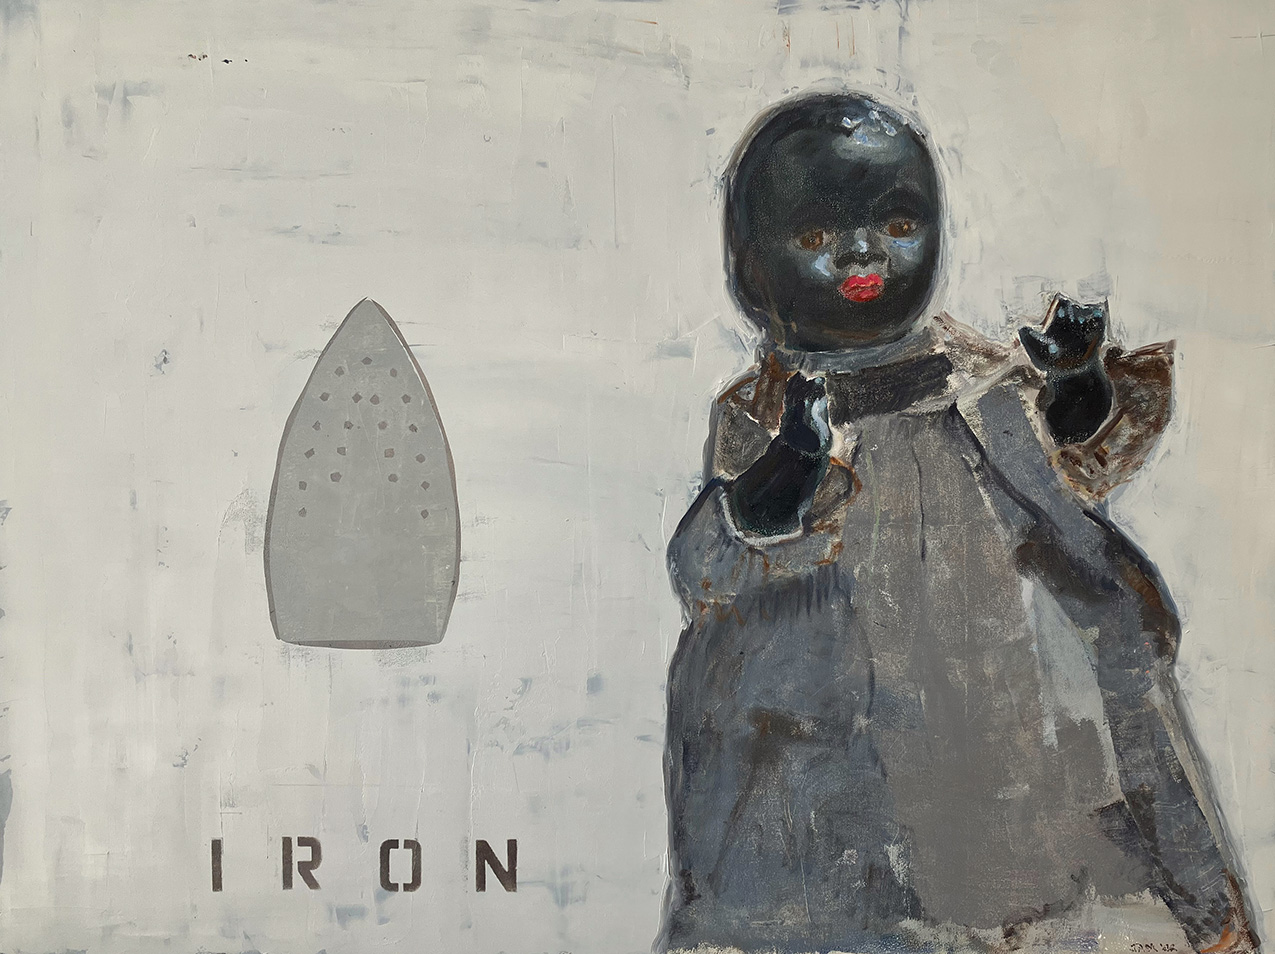 painting of an old-fashioned Black baby doll and the face of an iron with stenciled text IRON